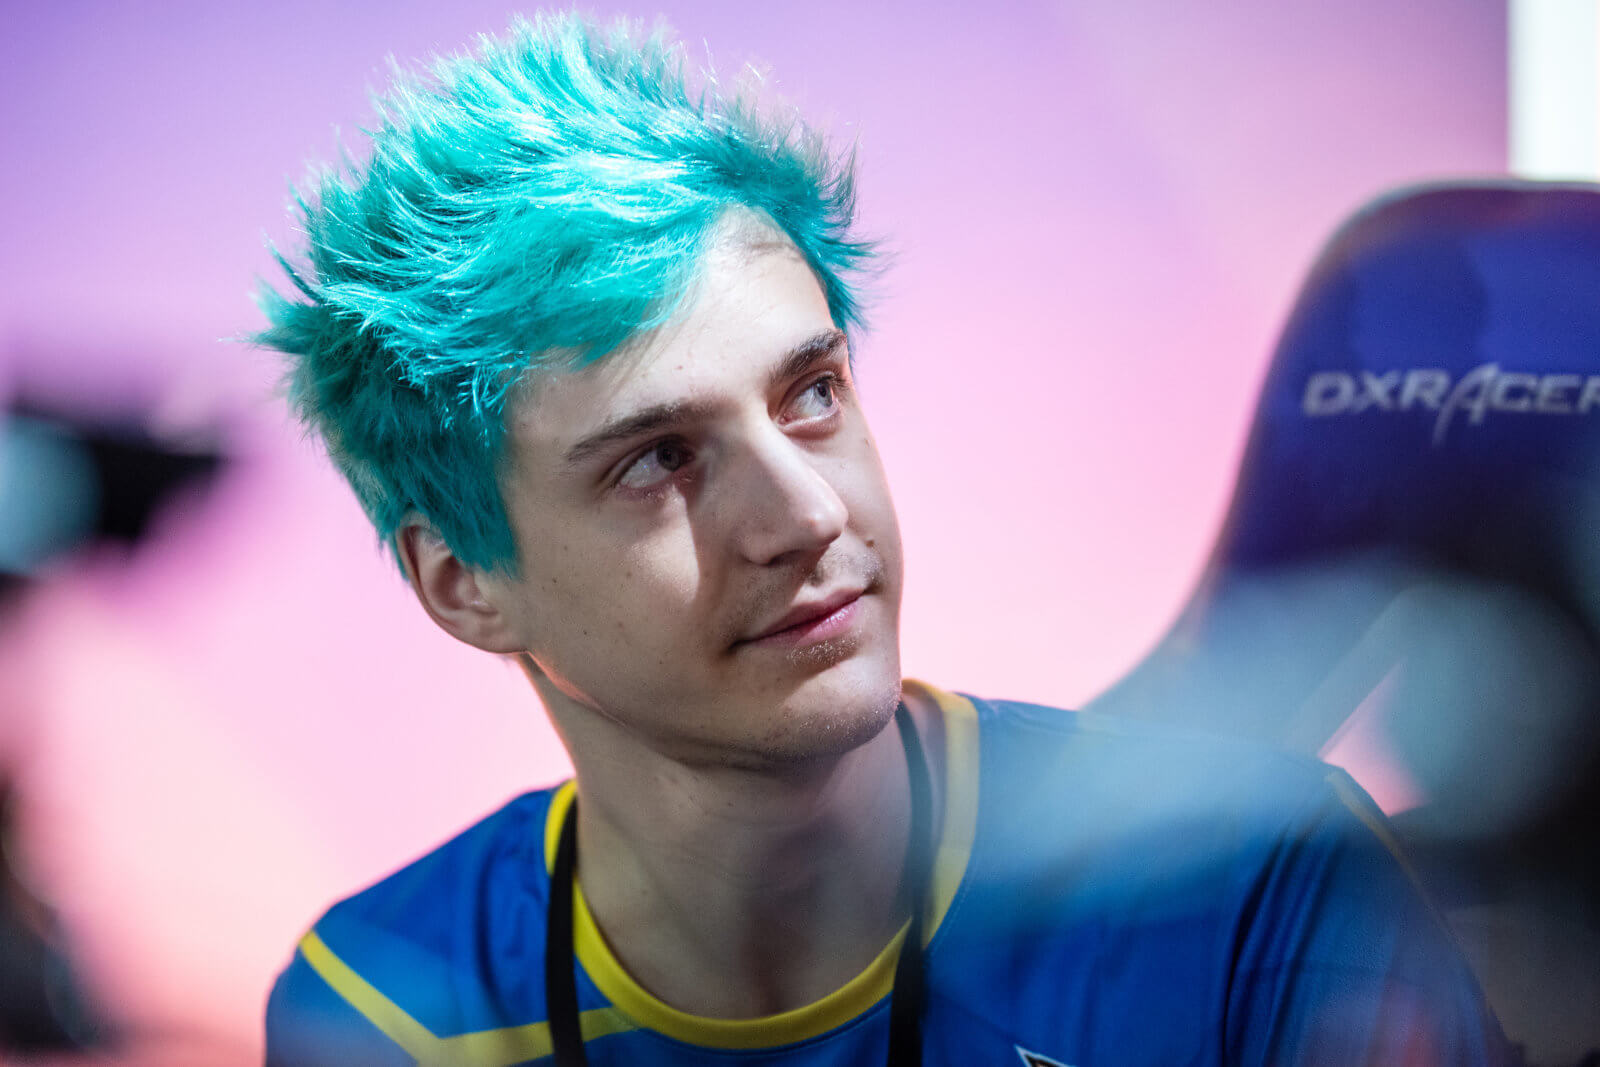 Ninja amasses a million subscribers on Mixer in less than a week